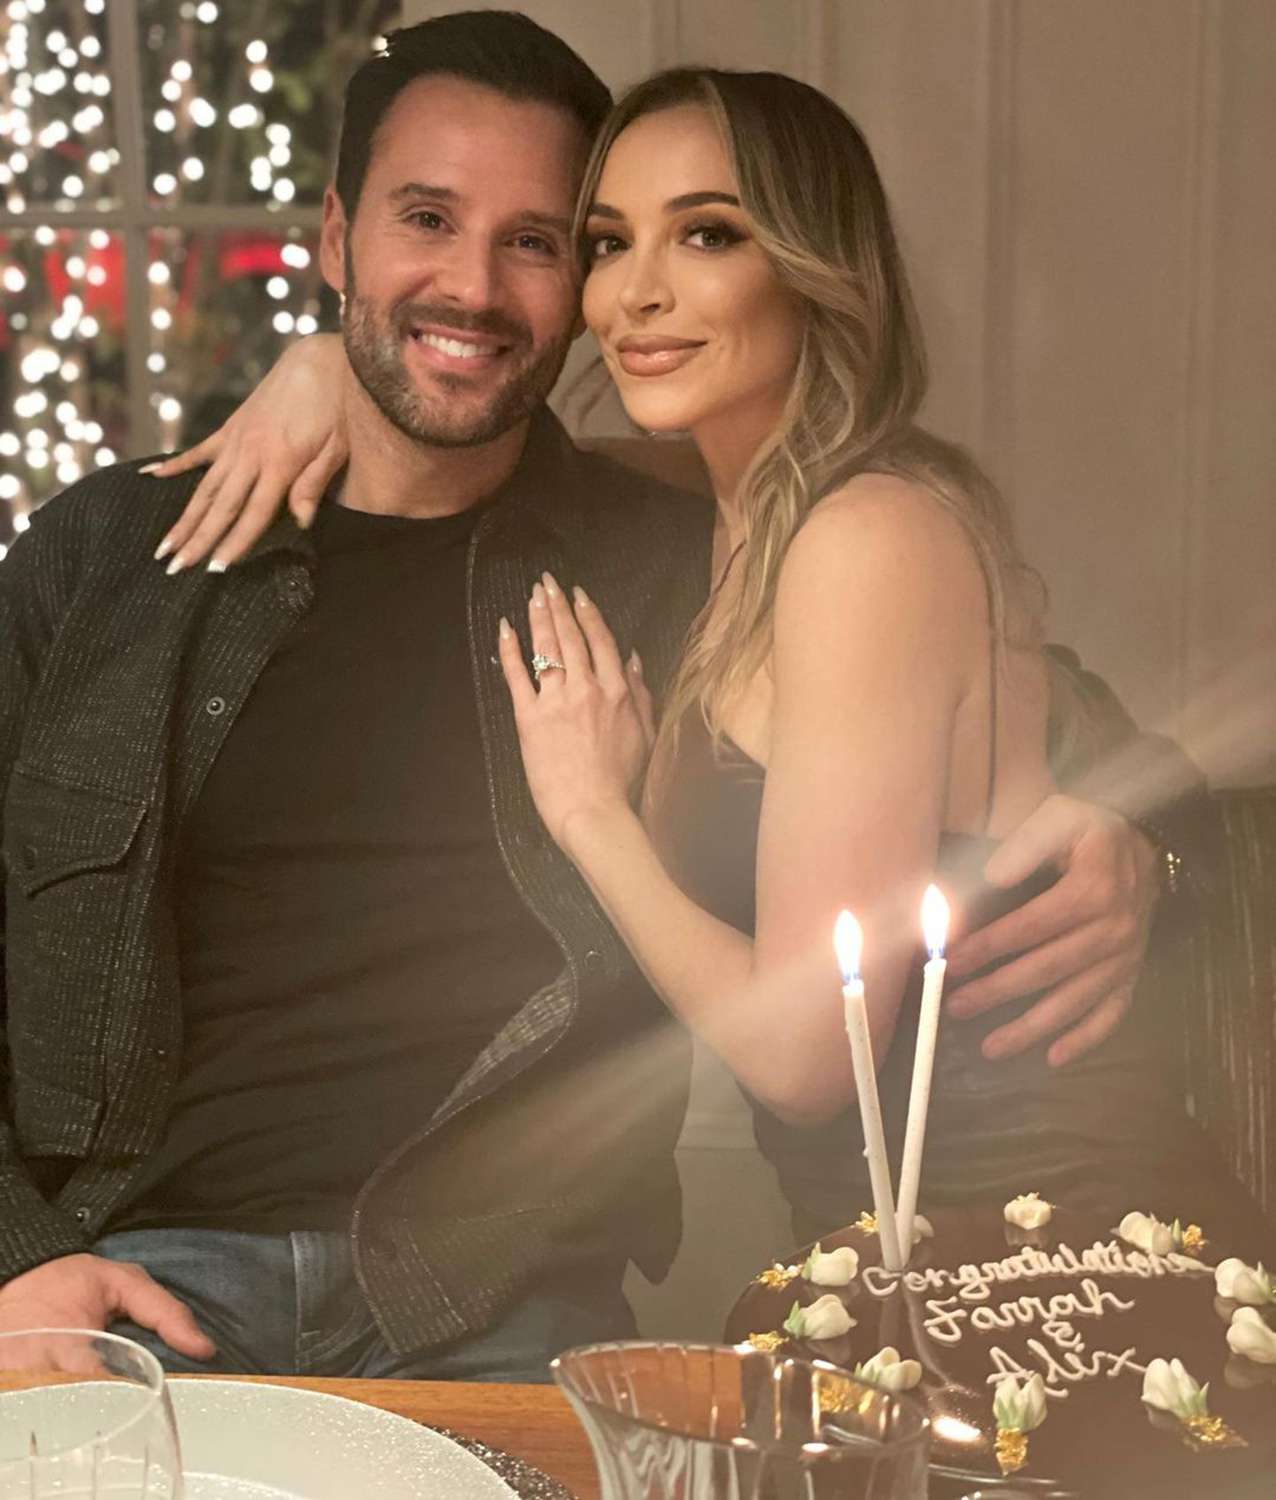 Farrah Brittany engaged